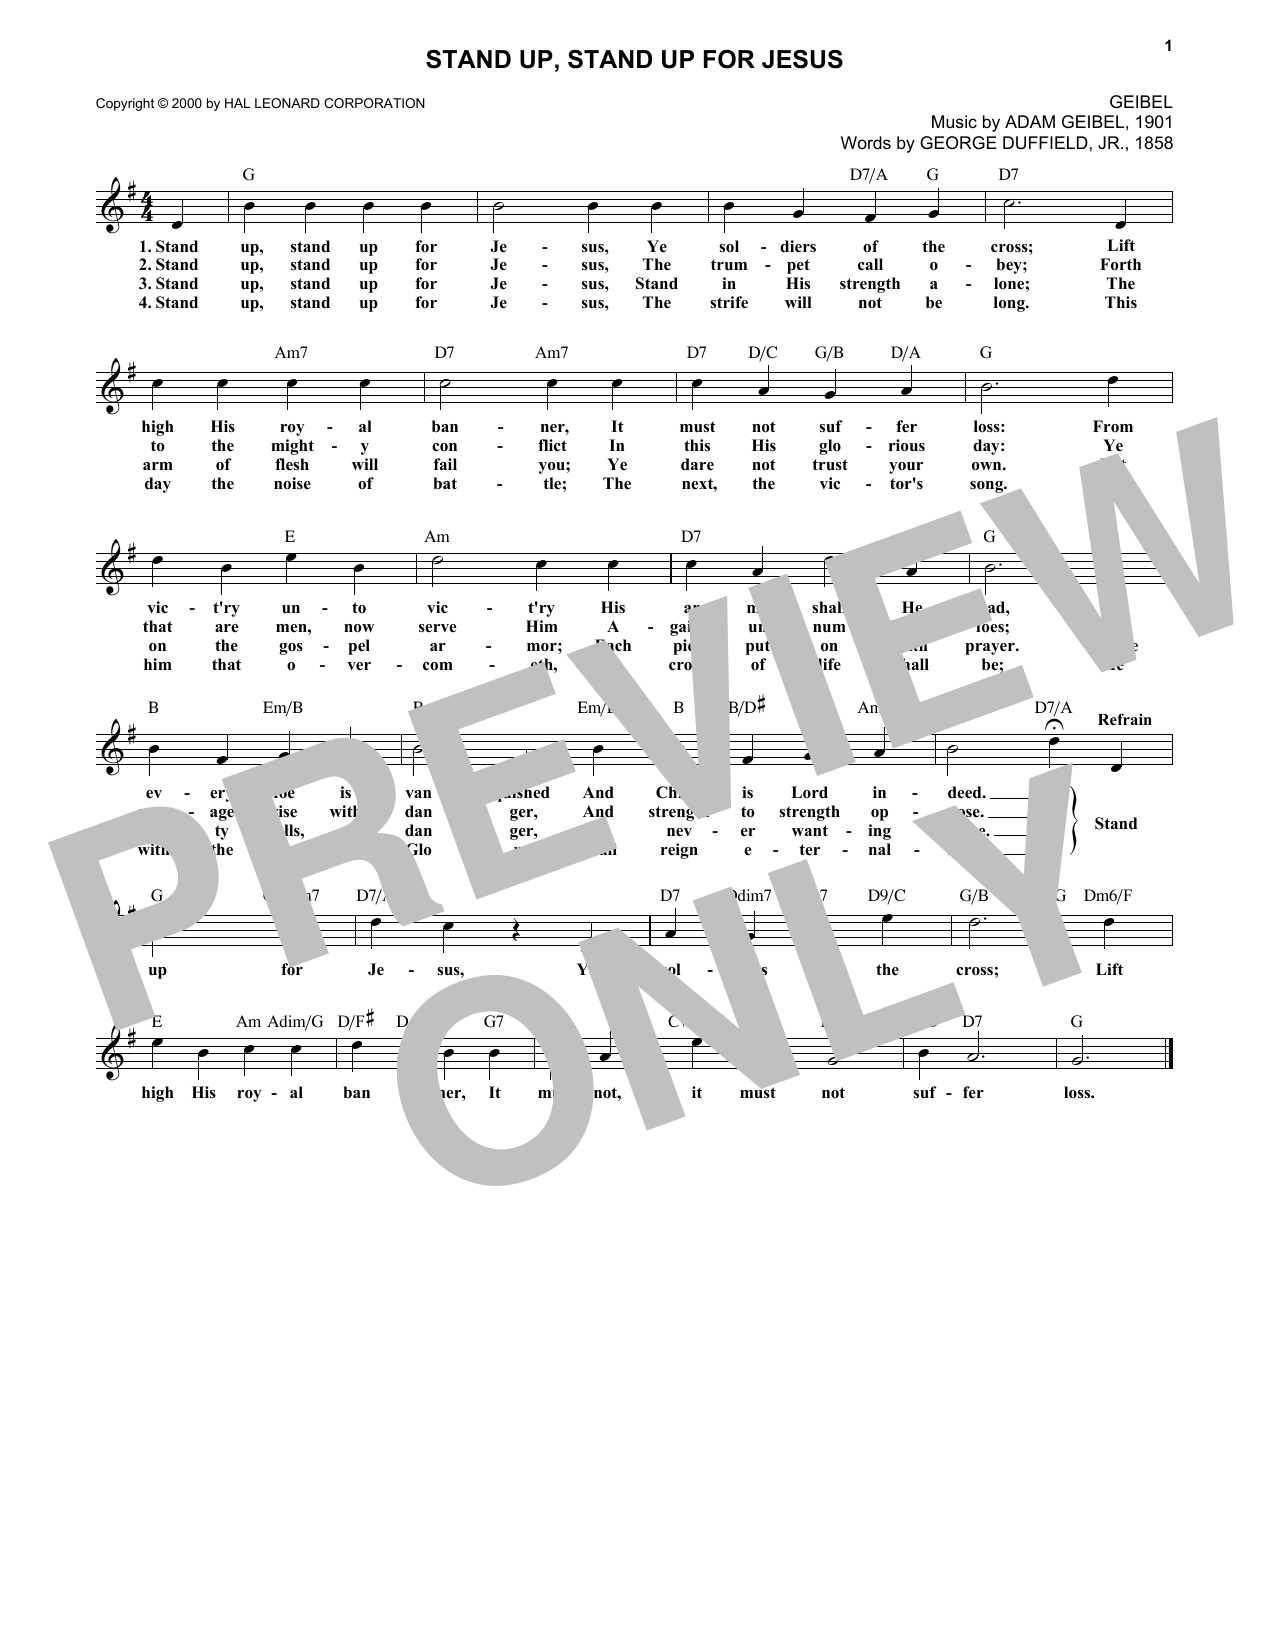 Download George Duffield, Jr. Stand Up, Stand Up For Jesus Sheet Music